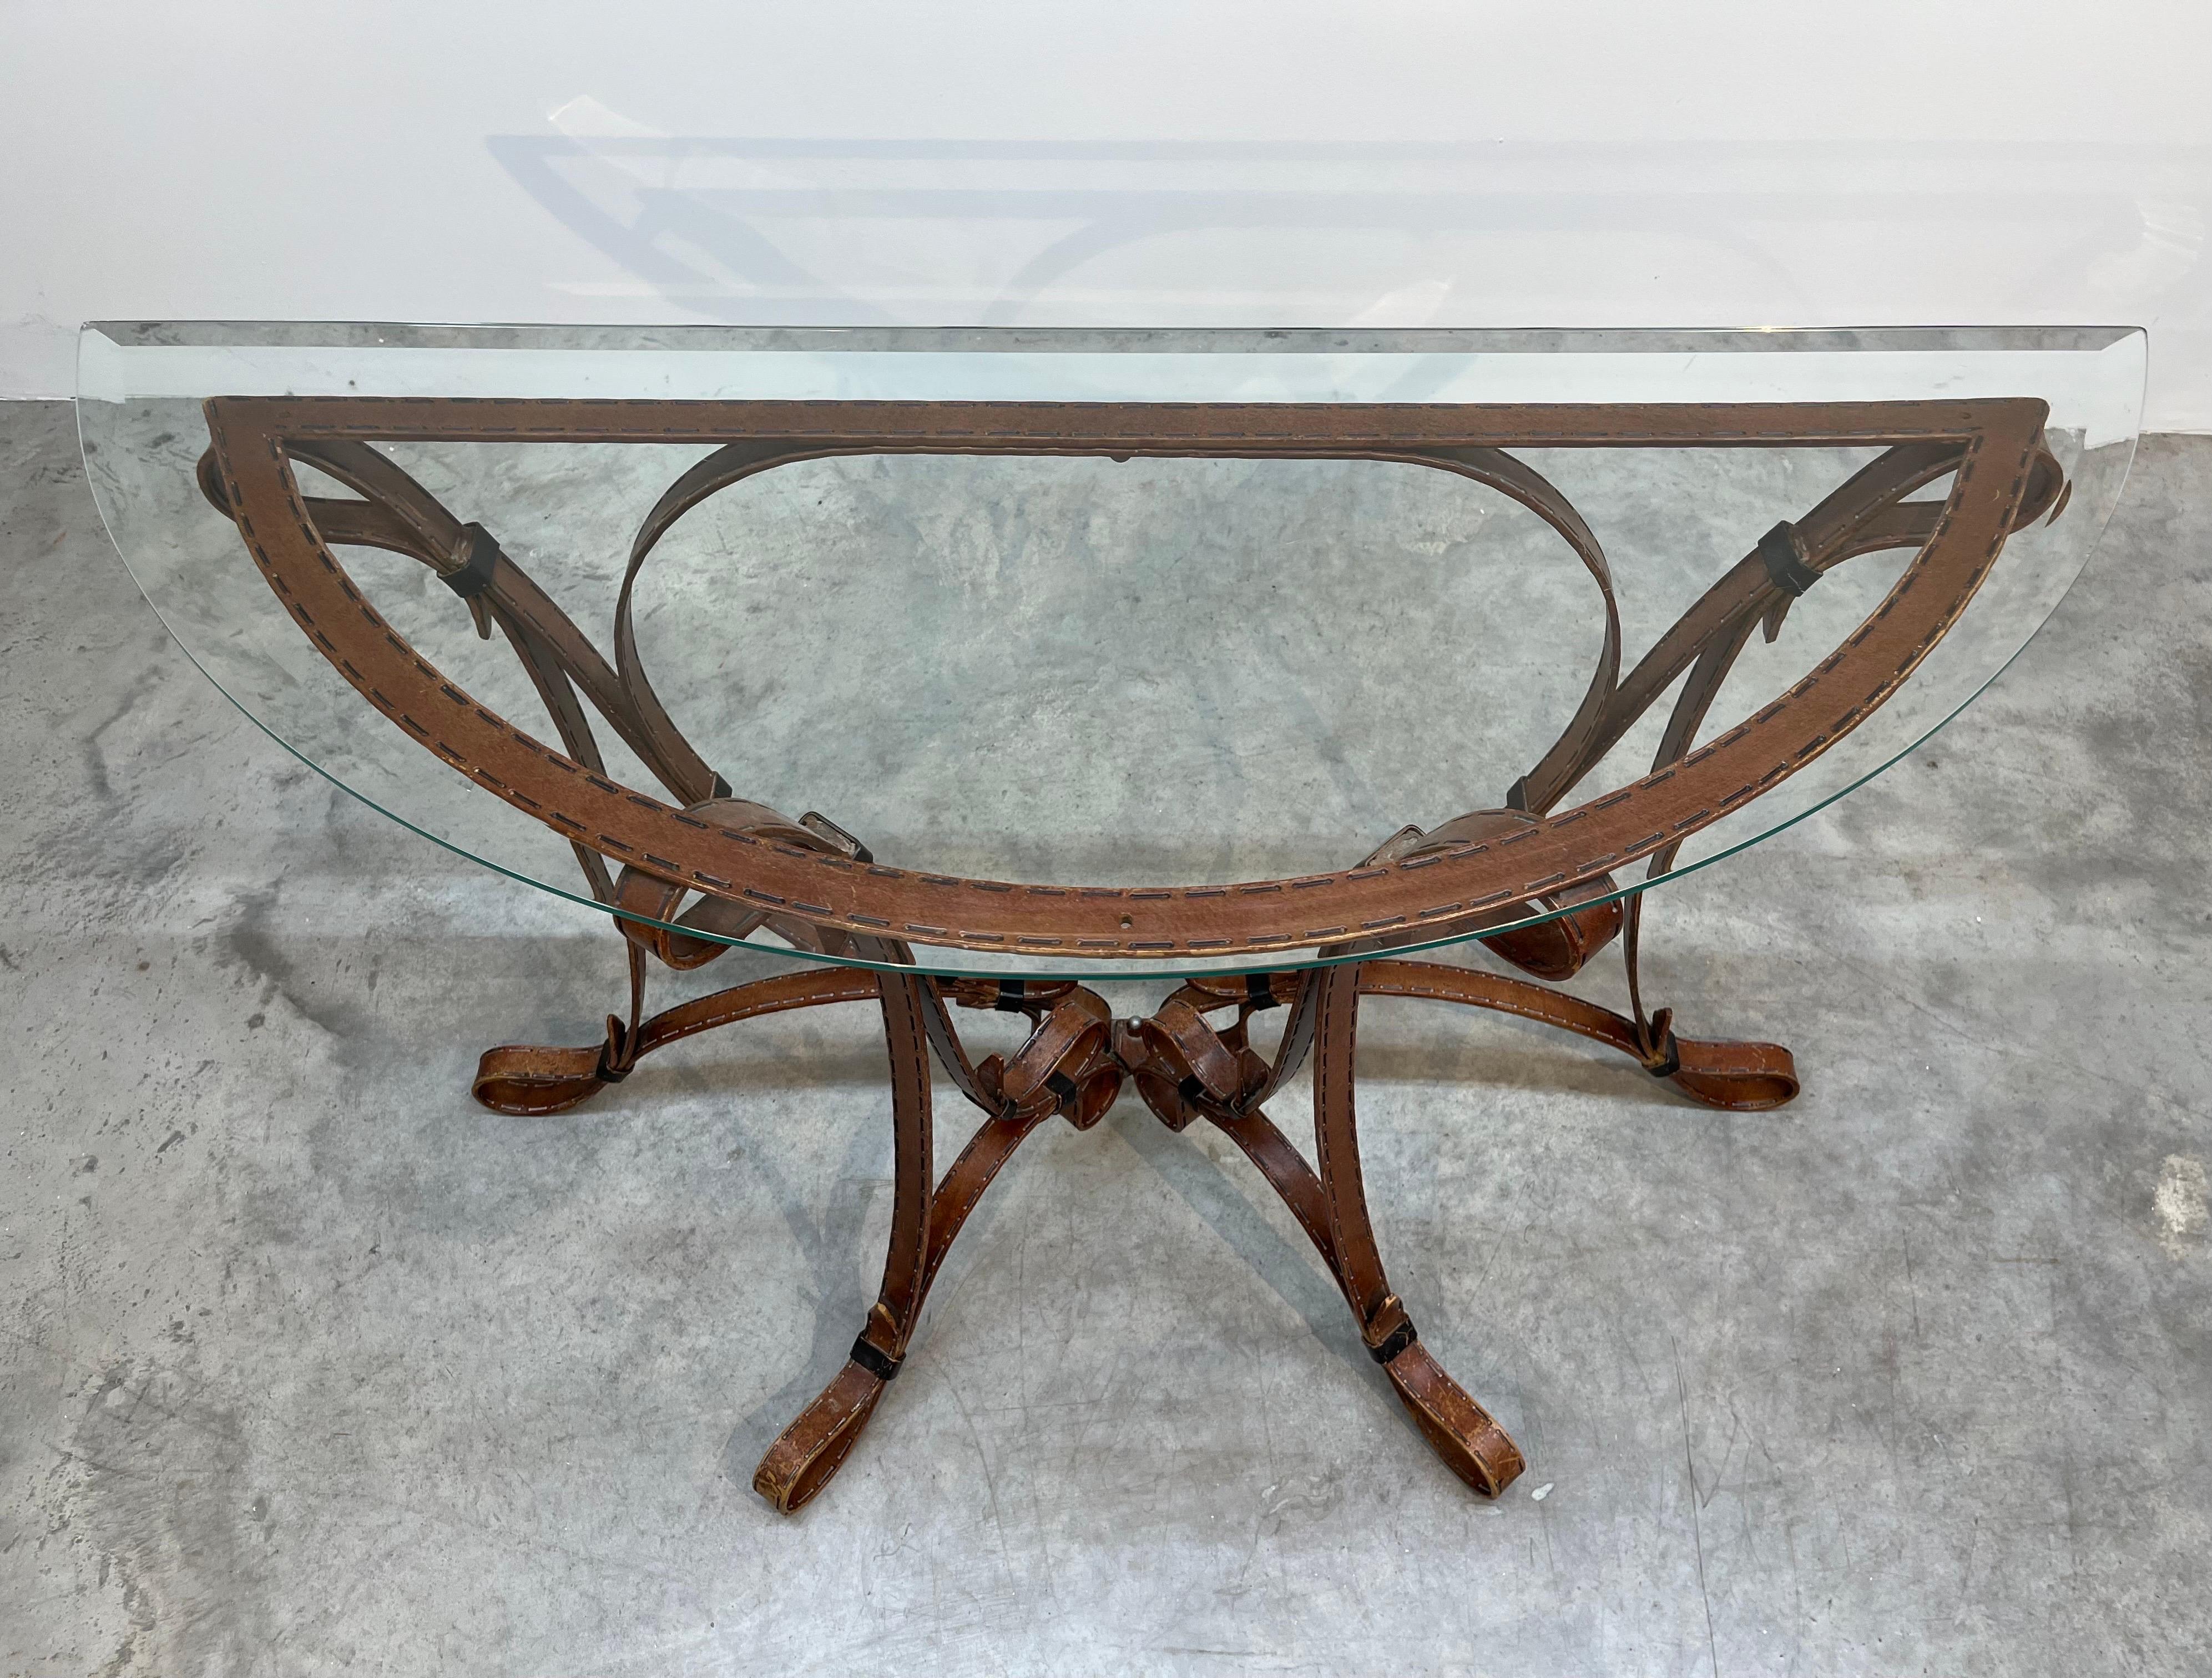 Italian Regency Jacques Adnet Hermes Style Demi-Lune Scrolled Iron Console Table